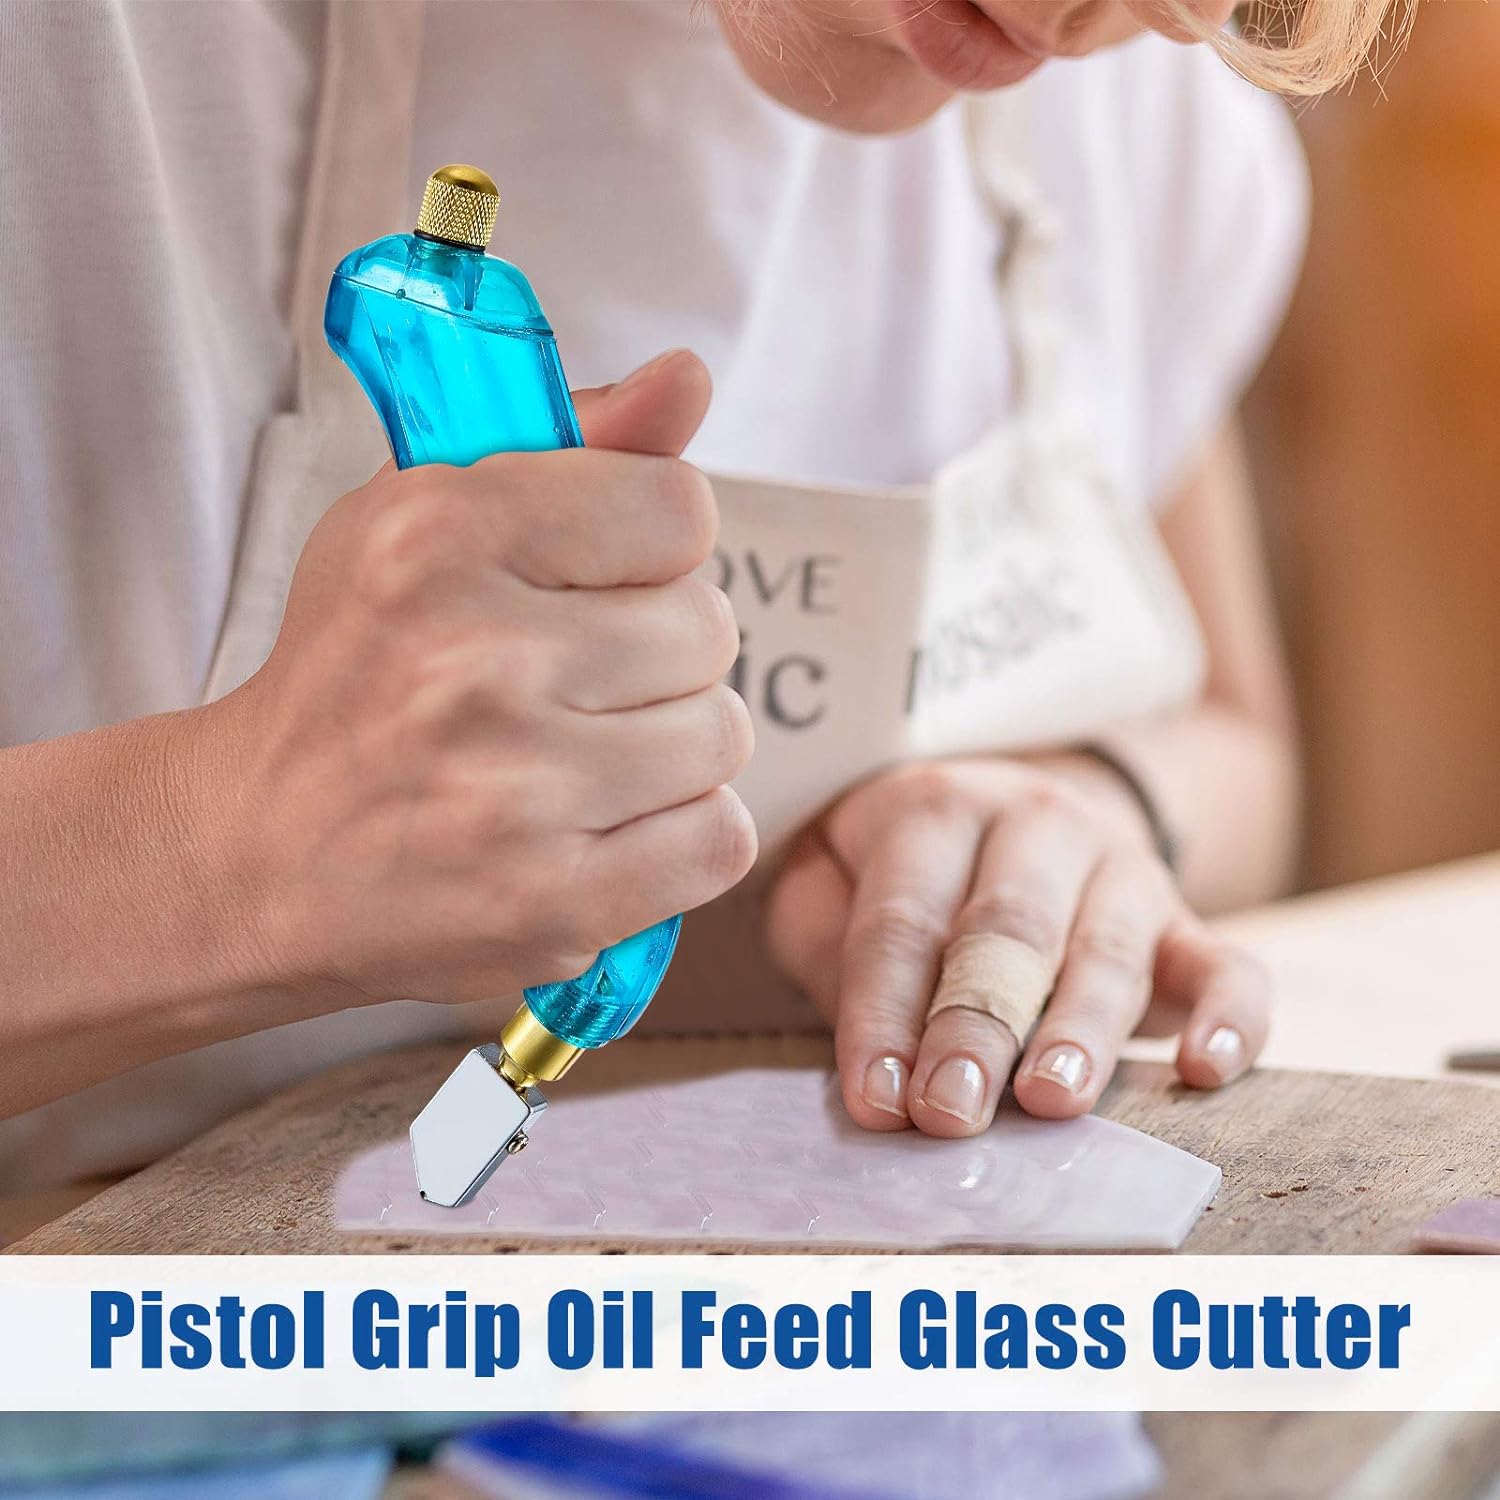 Pistol Grip Oil Feed Glass Cutter Stained Glass Cutting Tool 3 Pack